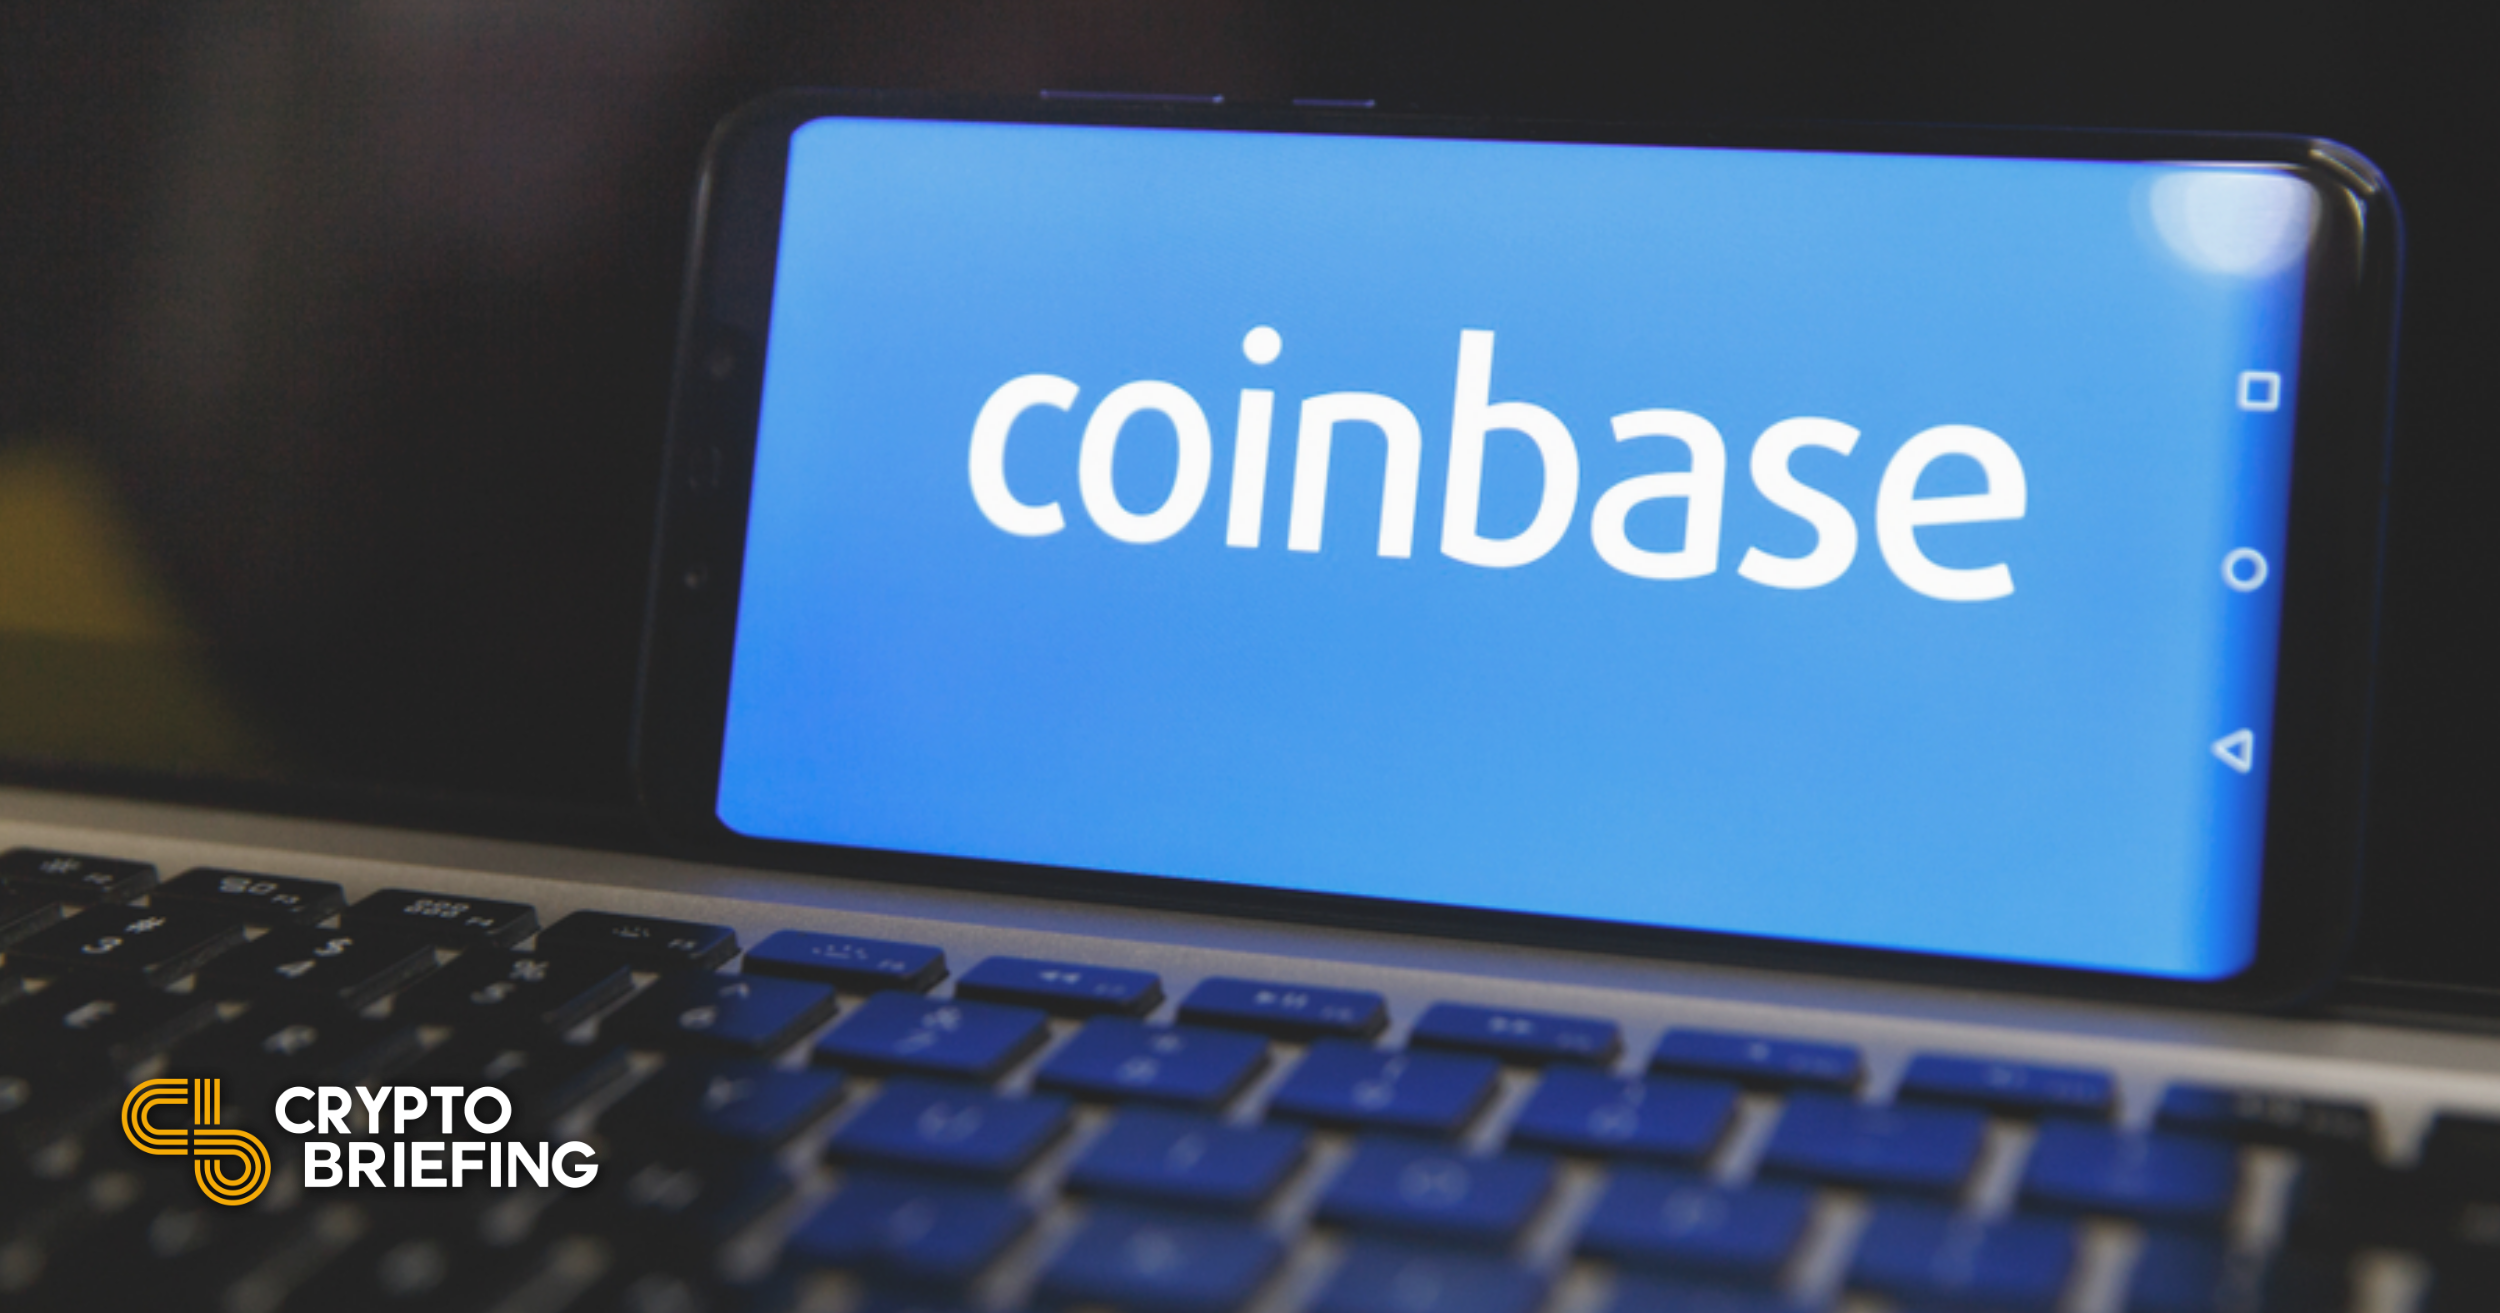 Coinbase Q1 Call Reveals Growth, Product Roadmap